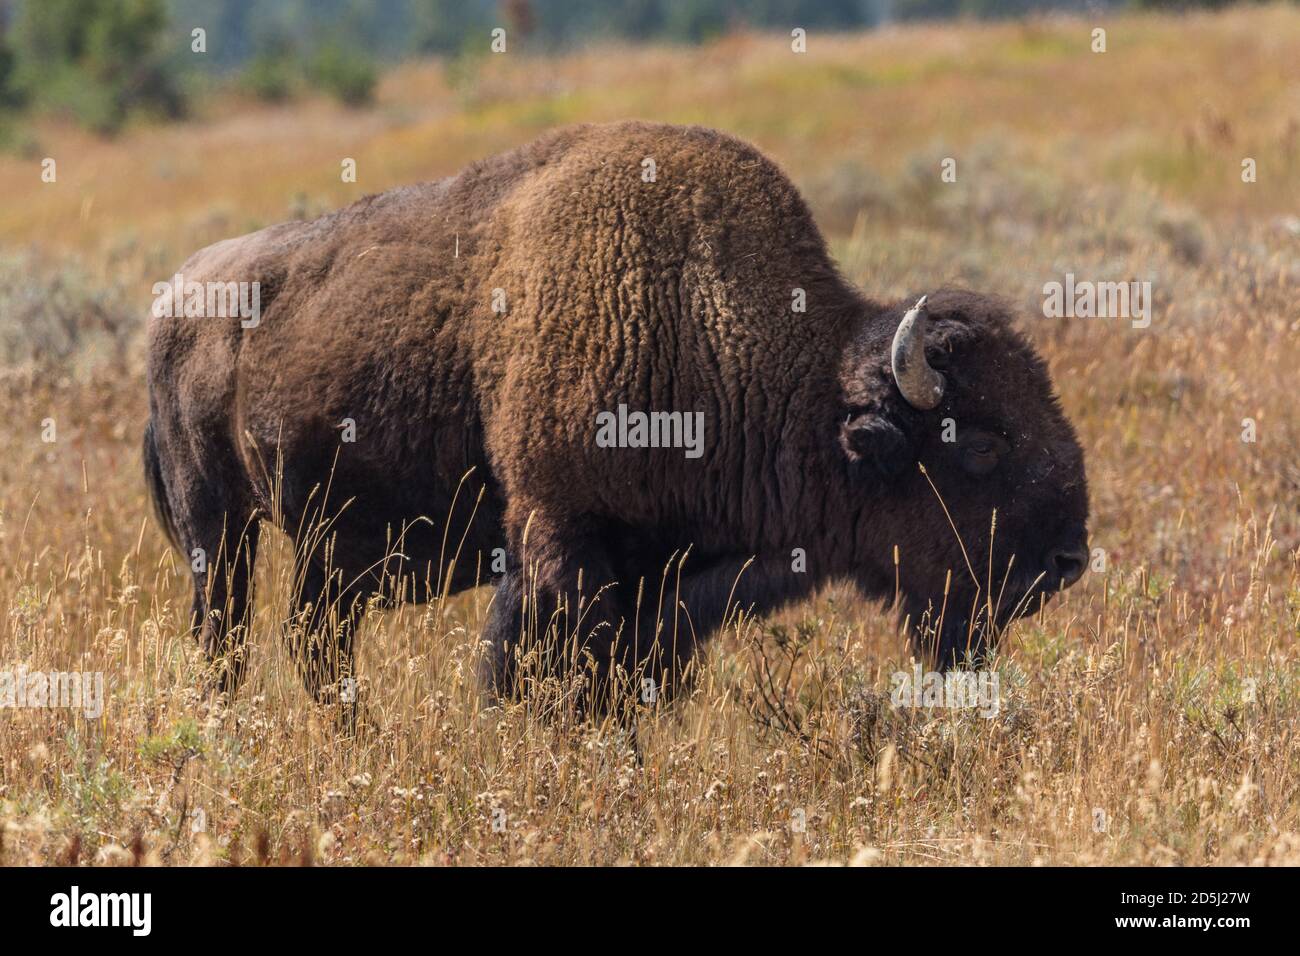 An American Bison in Yellowstone National Park in Wyoming, USA. Stock Photo